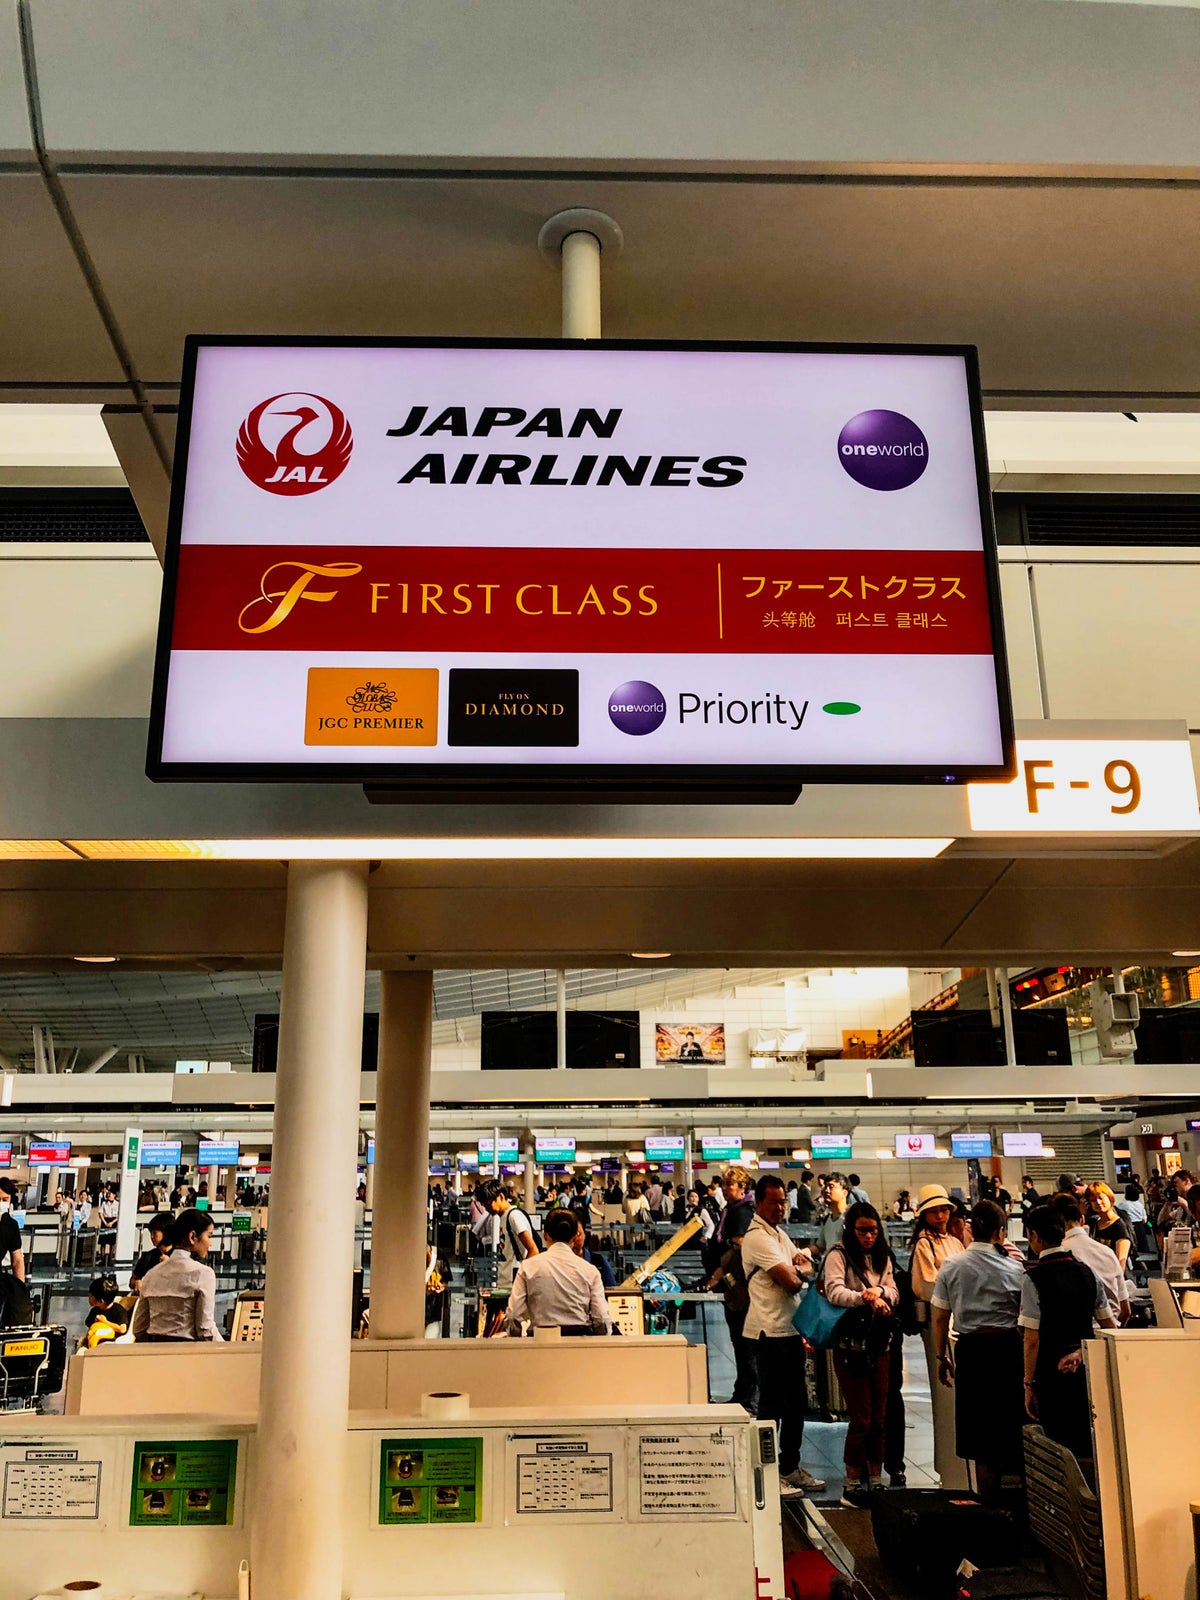 Japan Airlines First Class Check-In